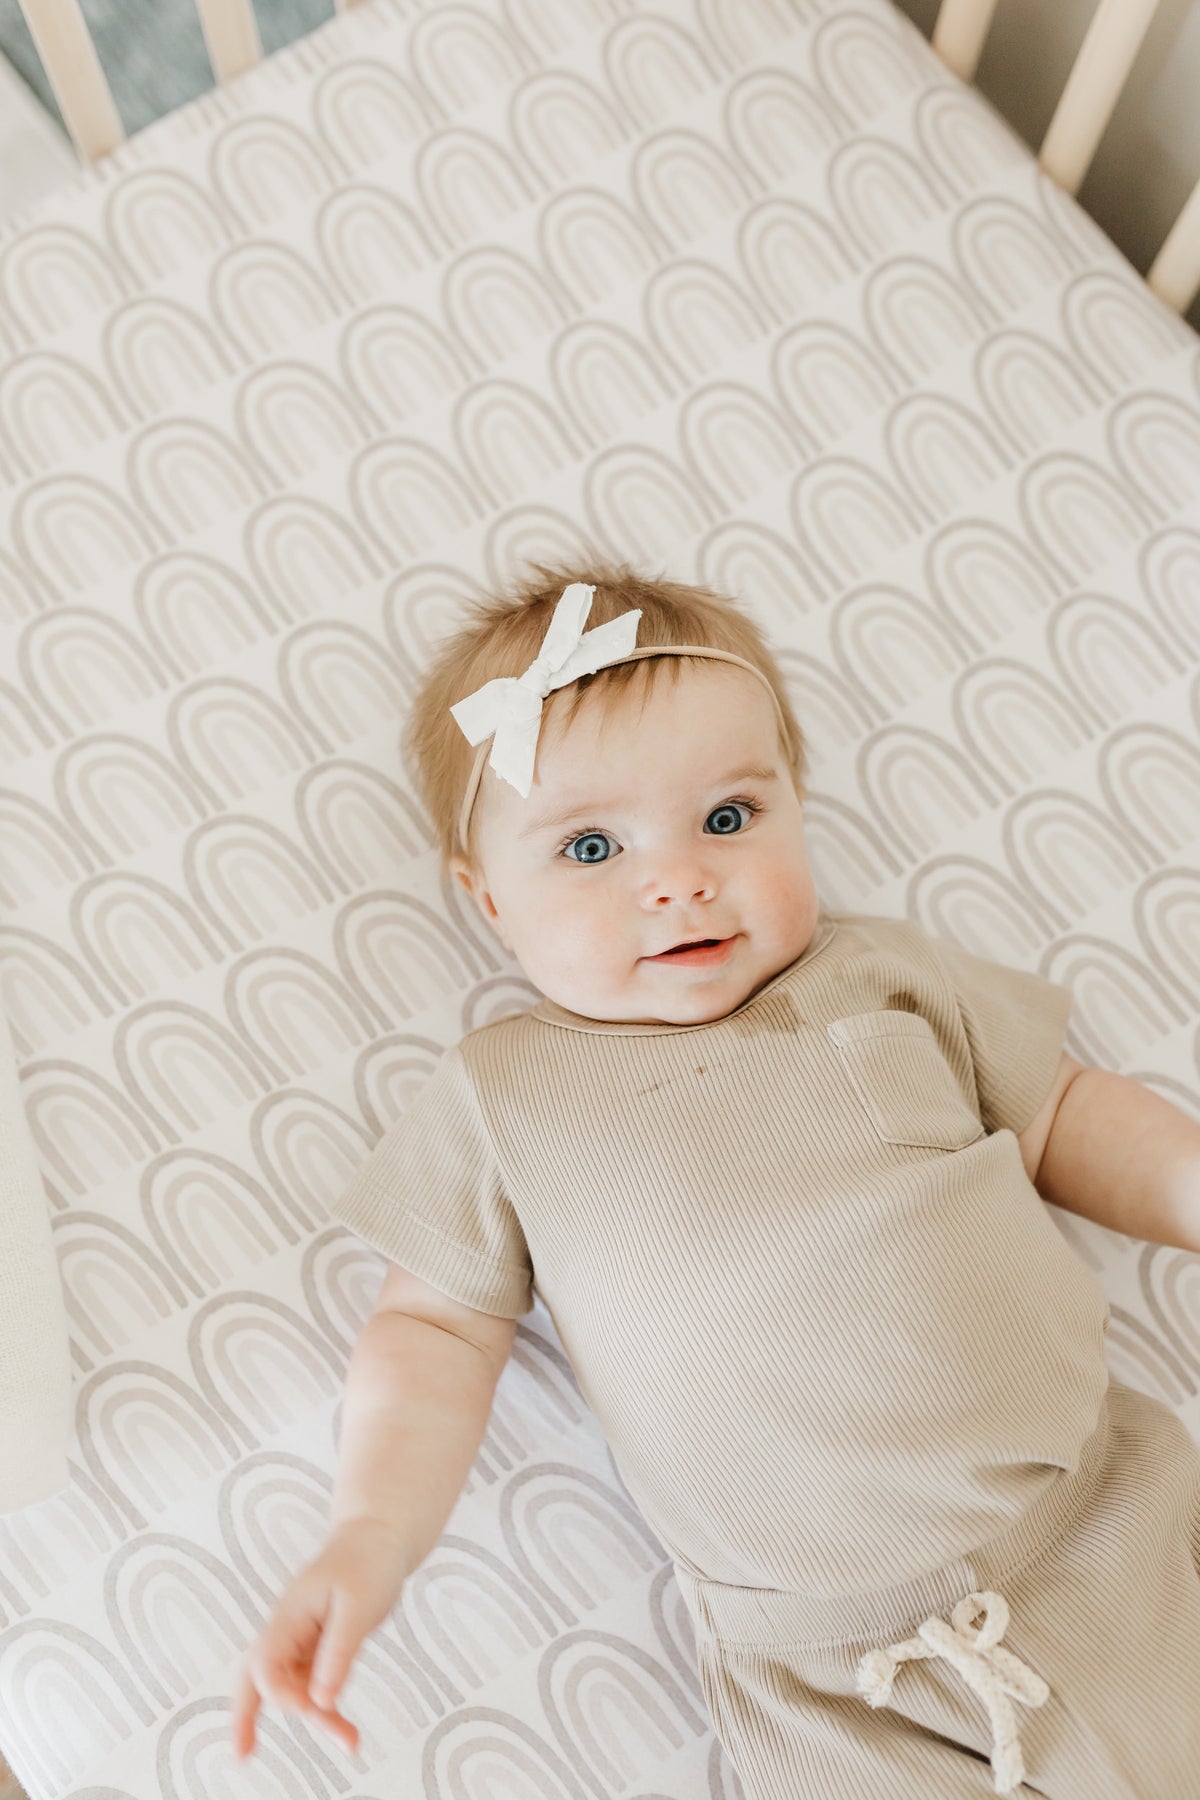 Premium Knit Fitted Crib Sheet - Bliss